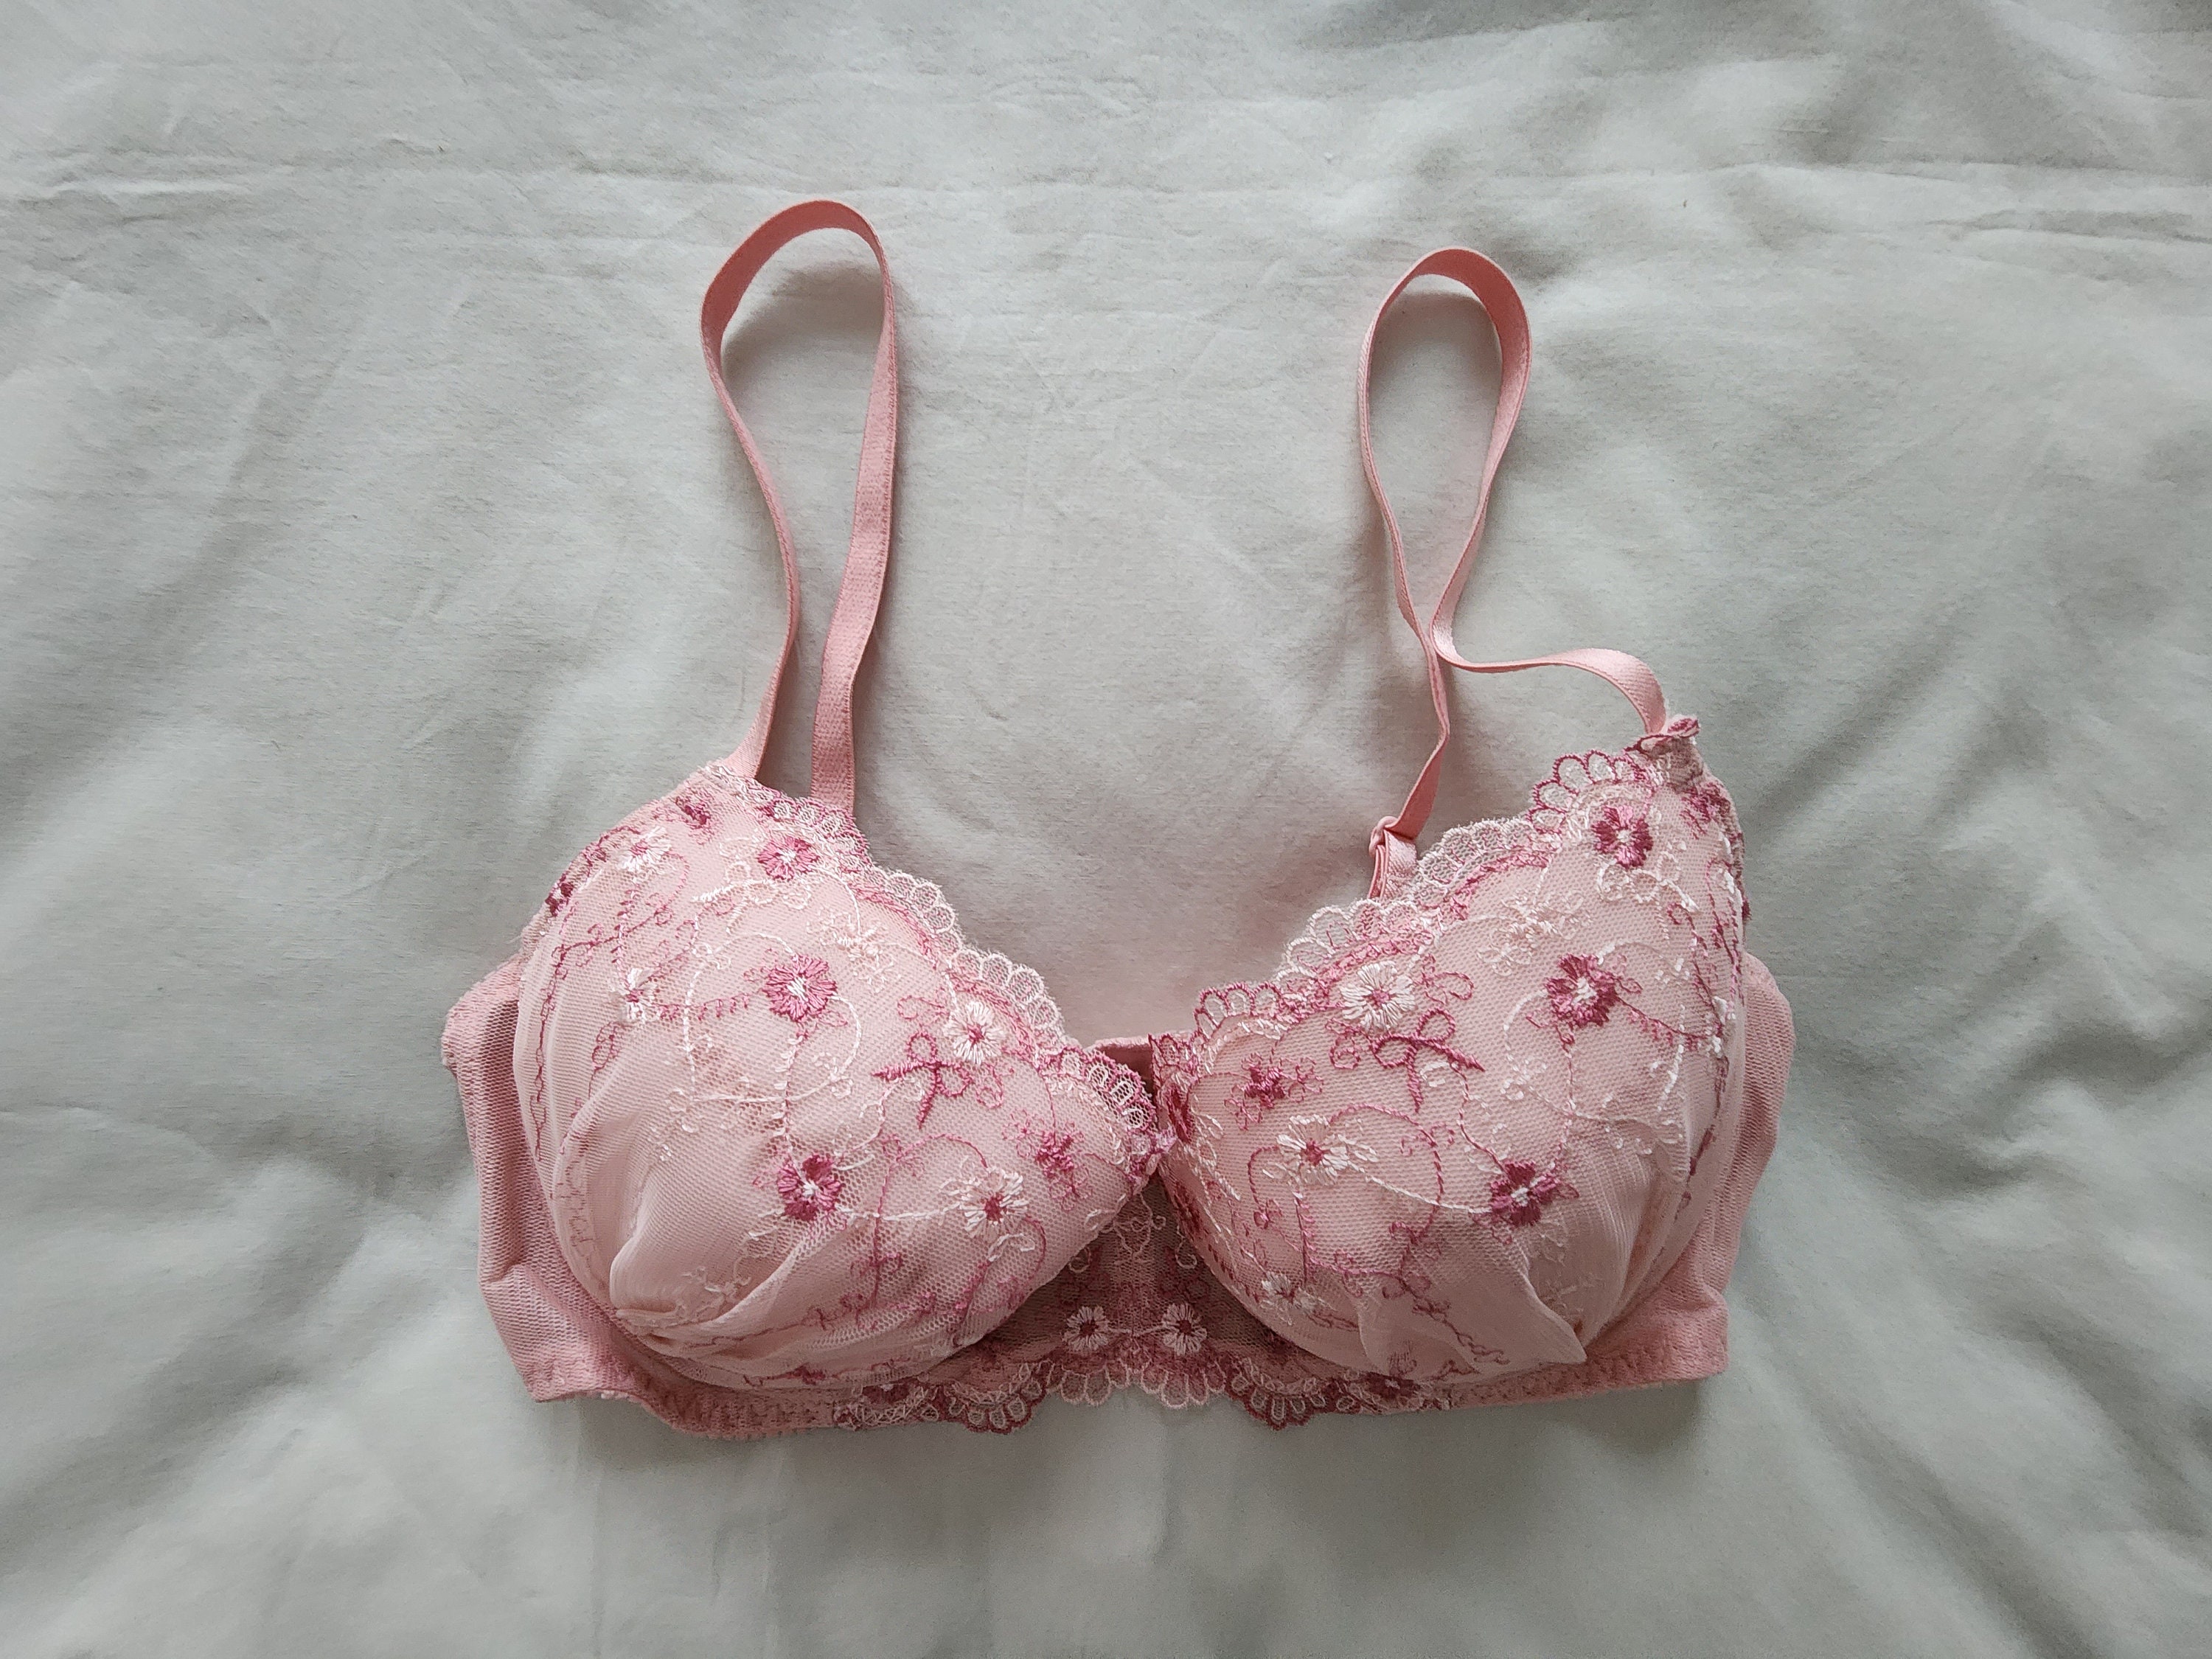 Vintage New Old Stock Bra From Japan size 12D Aus & 34D UK/US